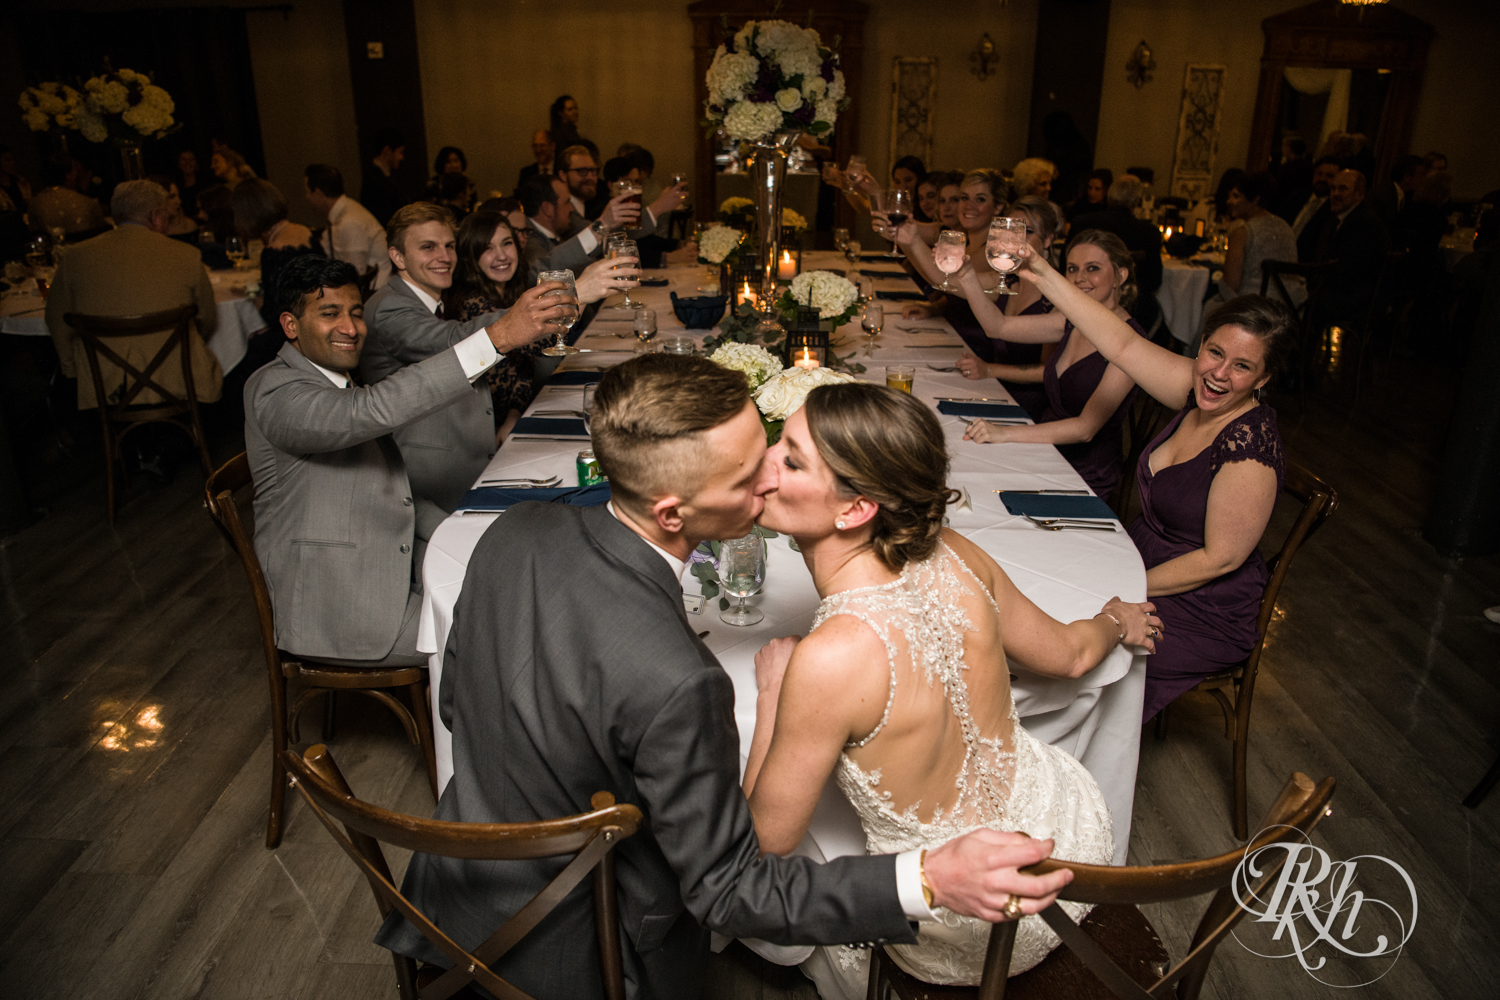 Bride and groom kiss at wedding reception at the Lumber Exchange Event Center in Minneapolis, Minnesota.